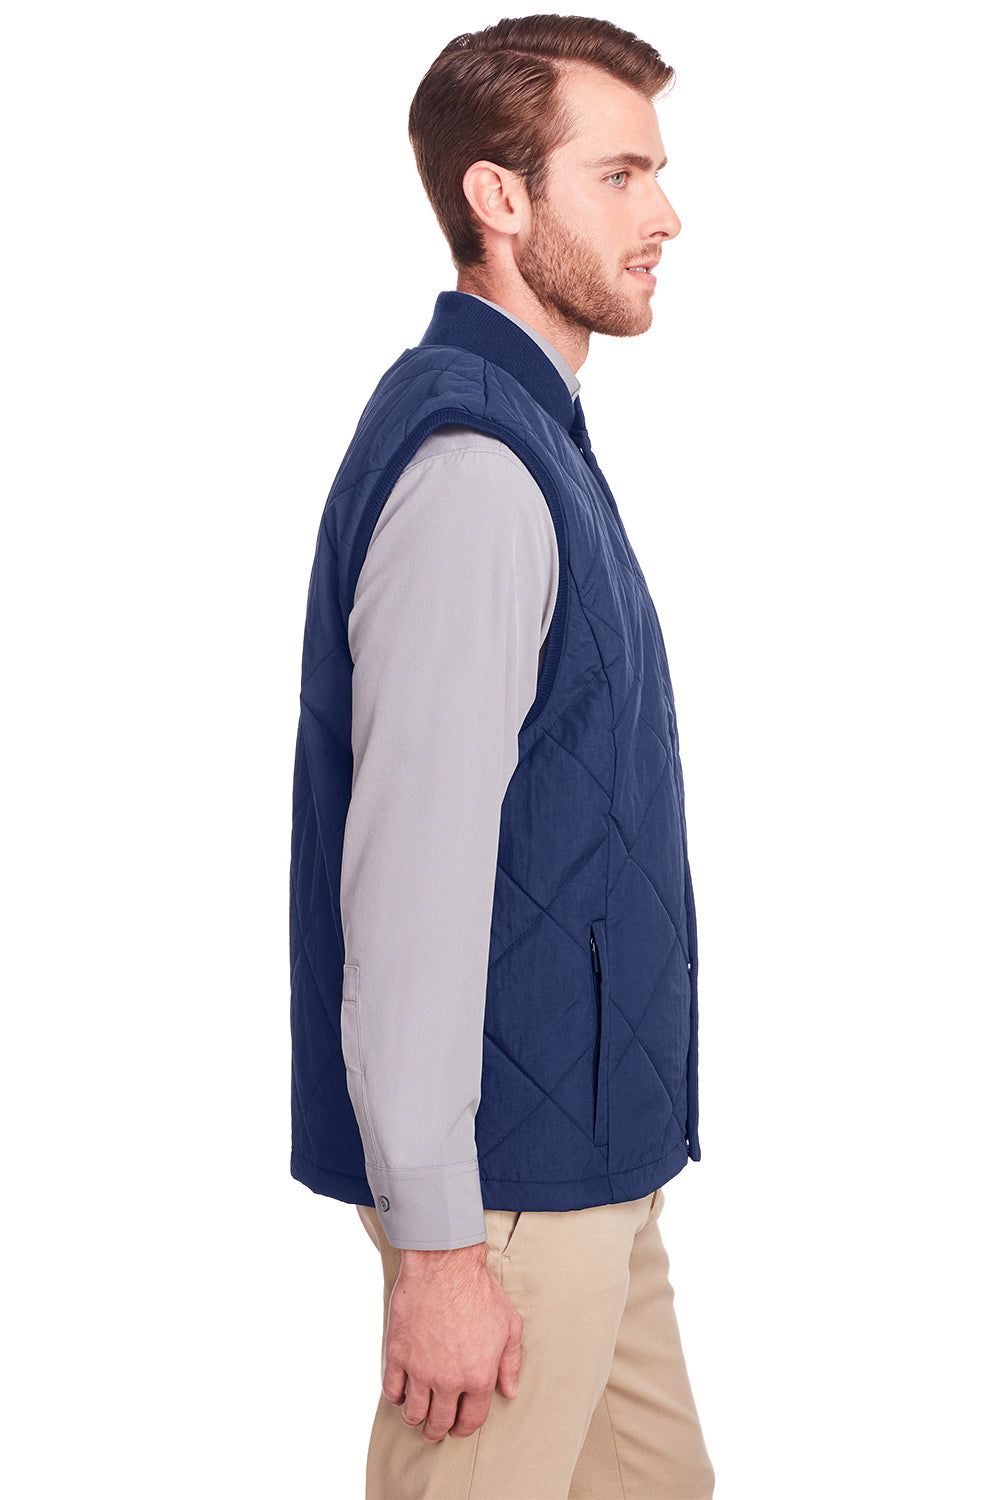 UltraClub UC709 Mens Dawson Quilted Full Zip Vest Navy Blue Side